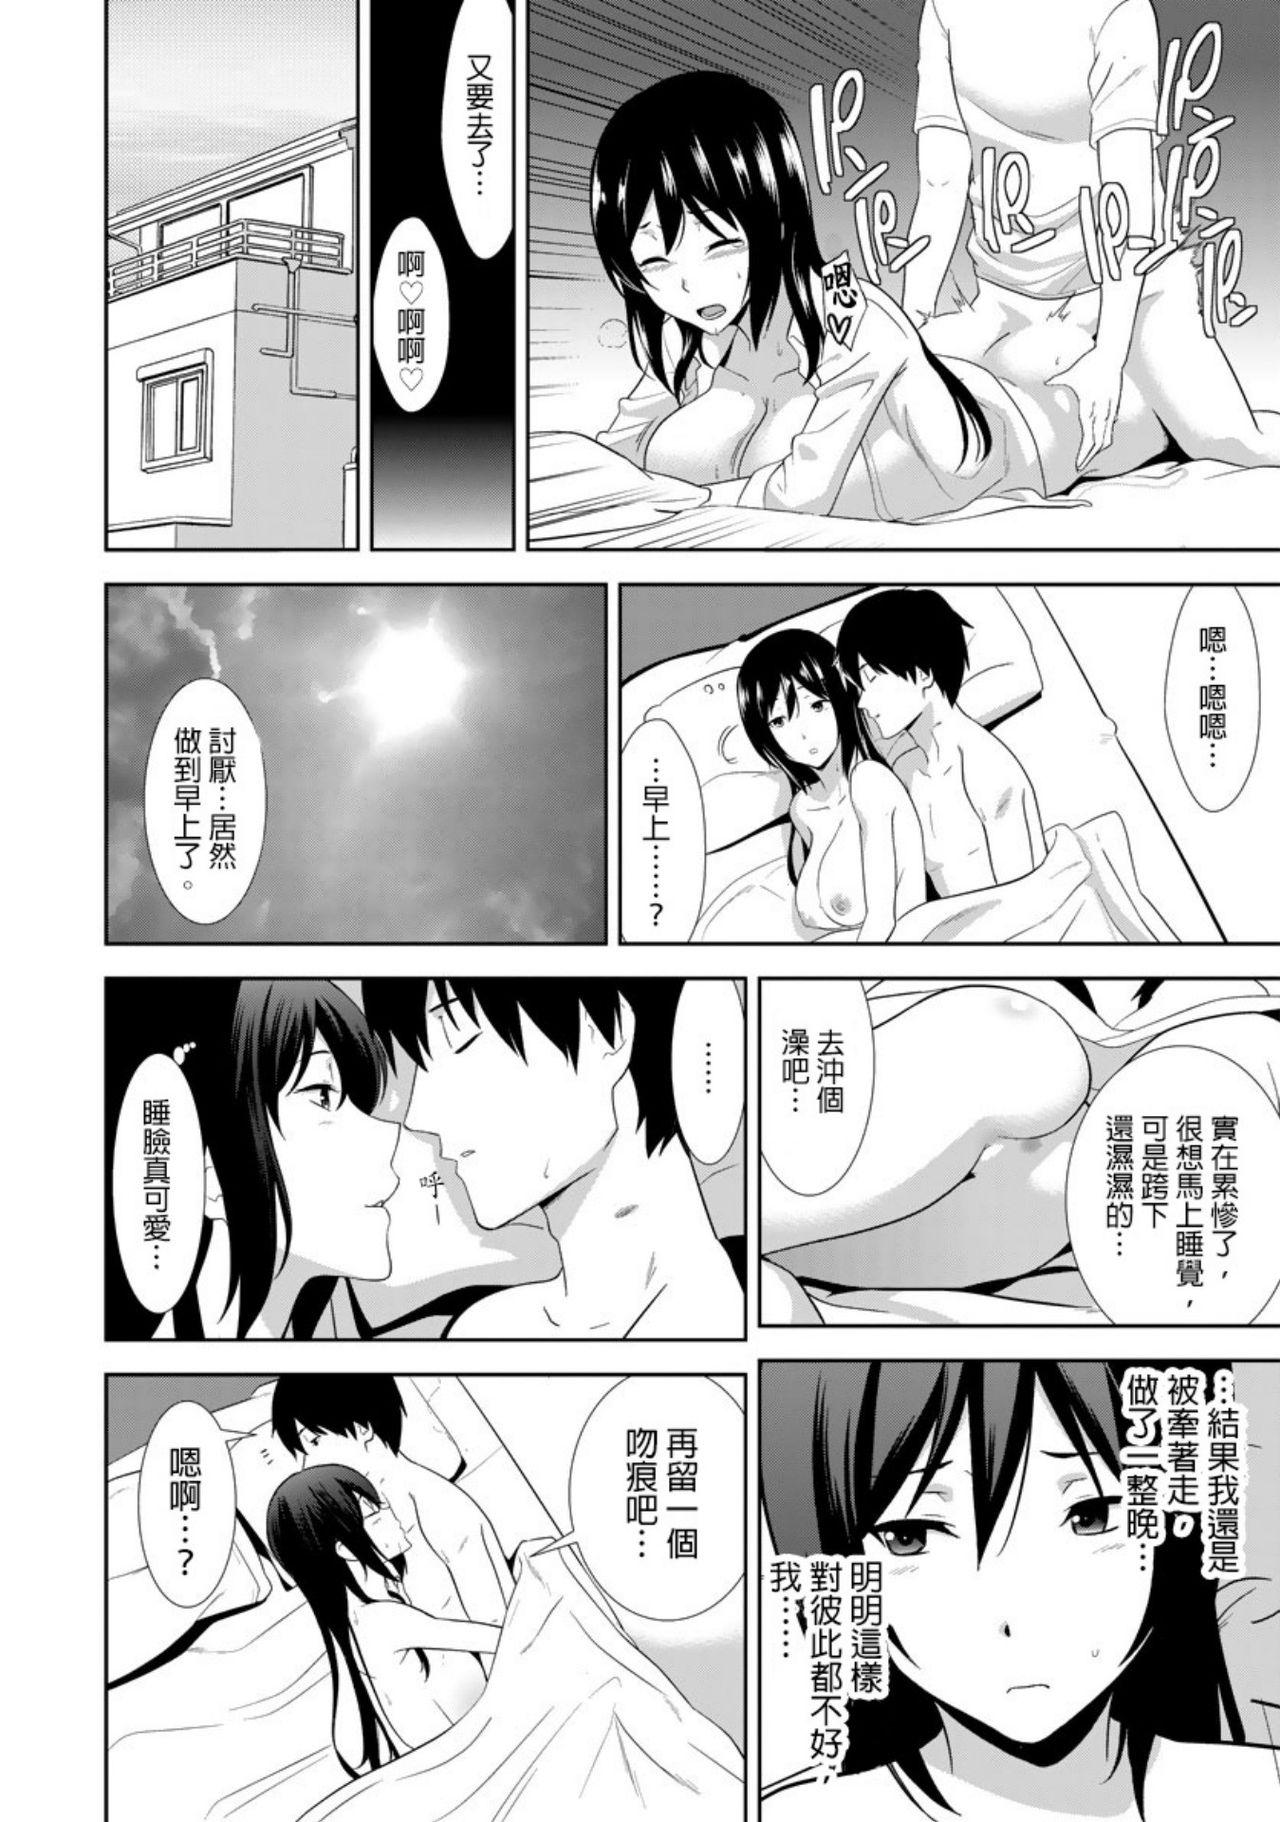 Lez Fuck 教え子に襲ワレル人妻は抵抗できなくて Ch.7 8teen - Page 13